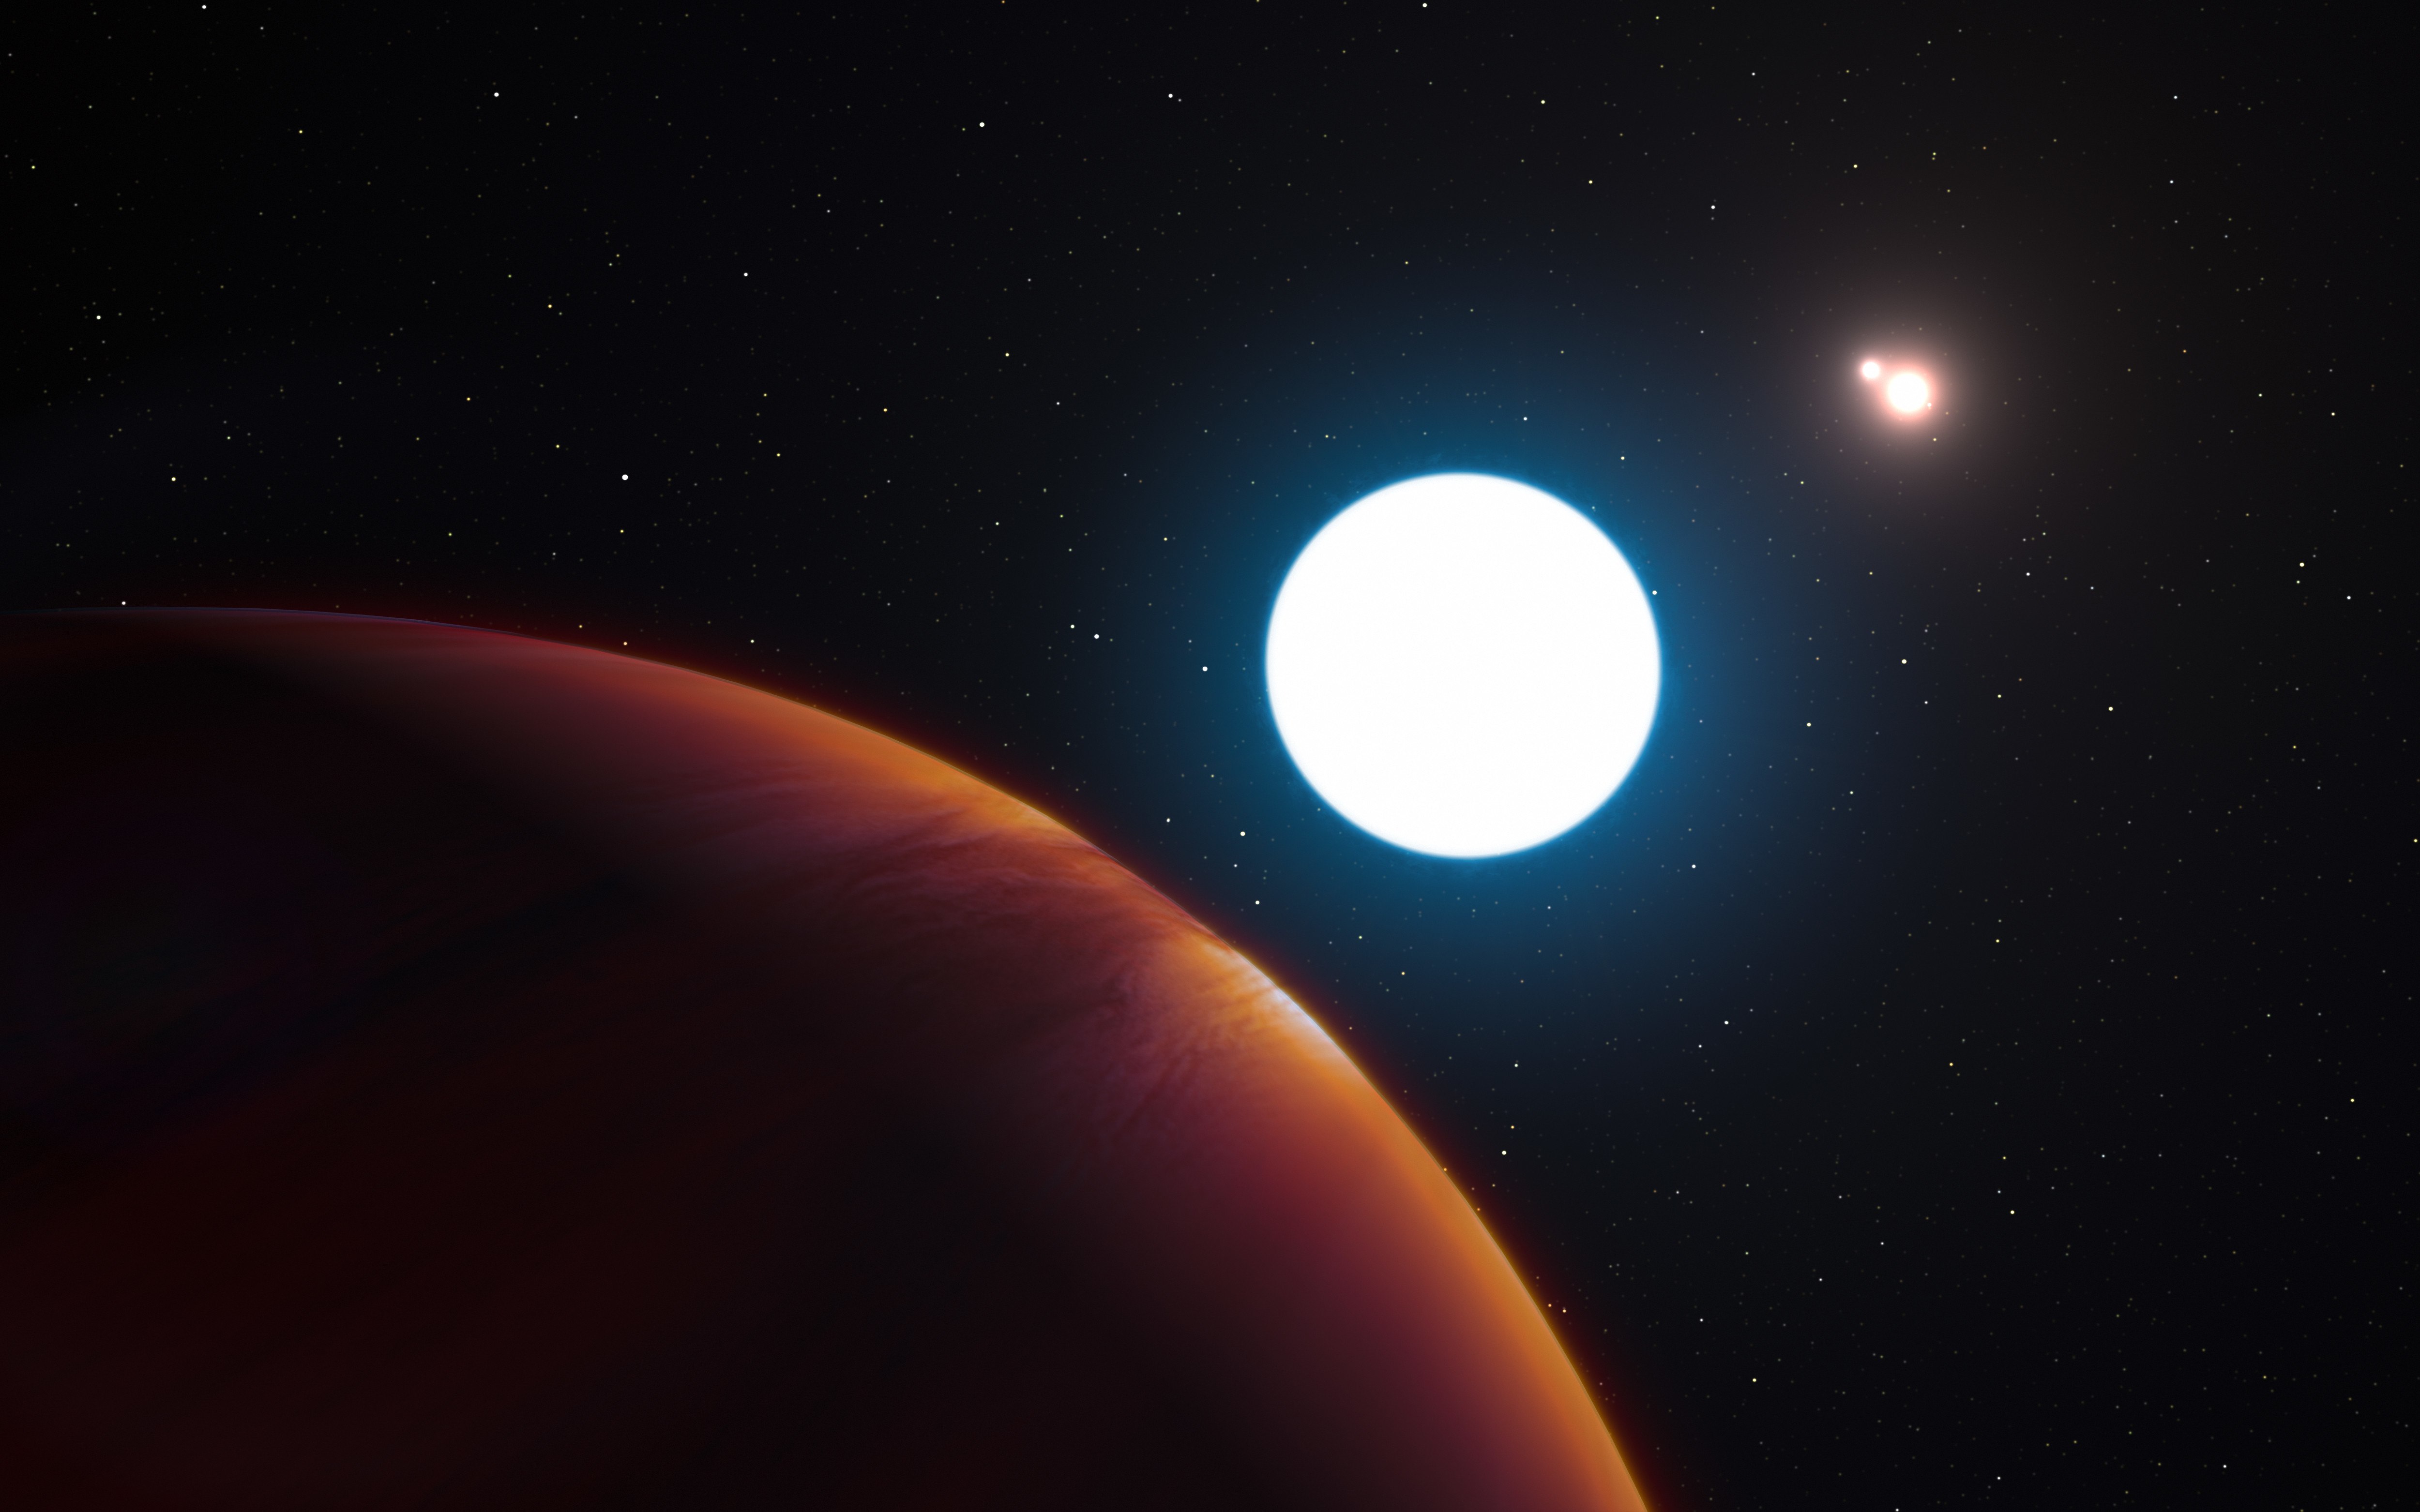 Newly discovered Planets 5K HD Wallpapers.